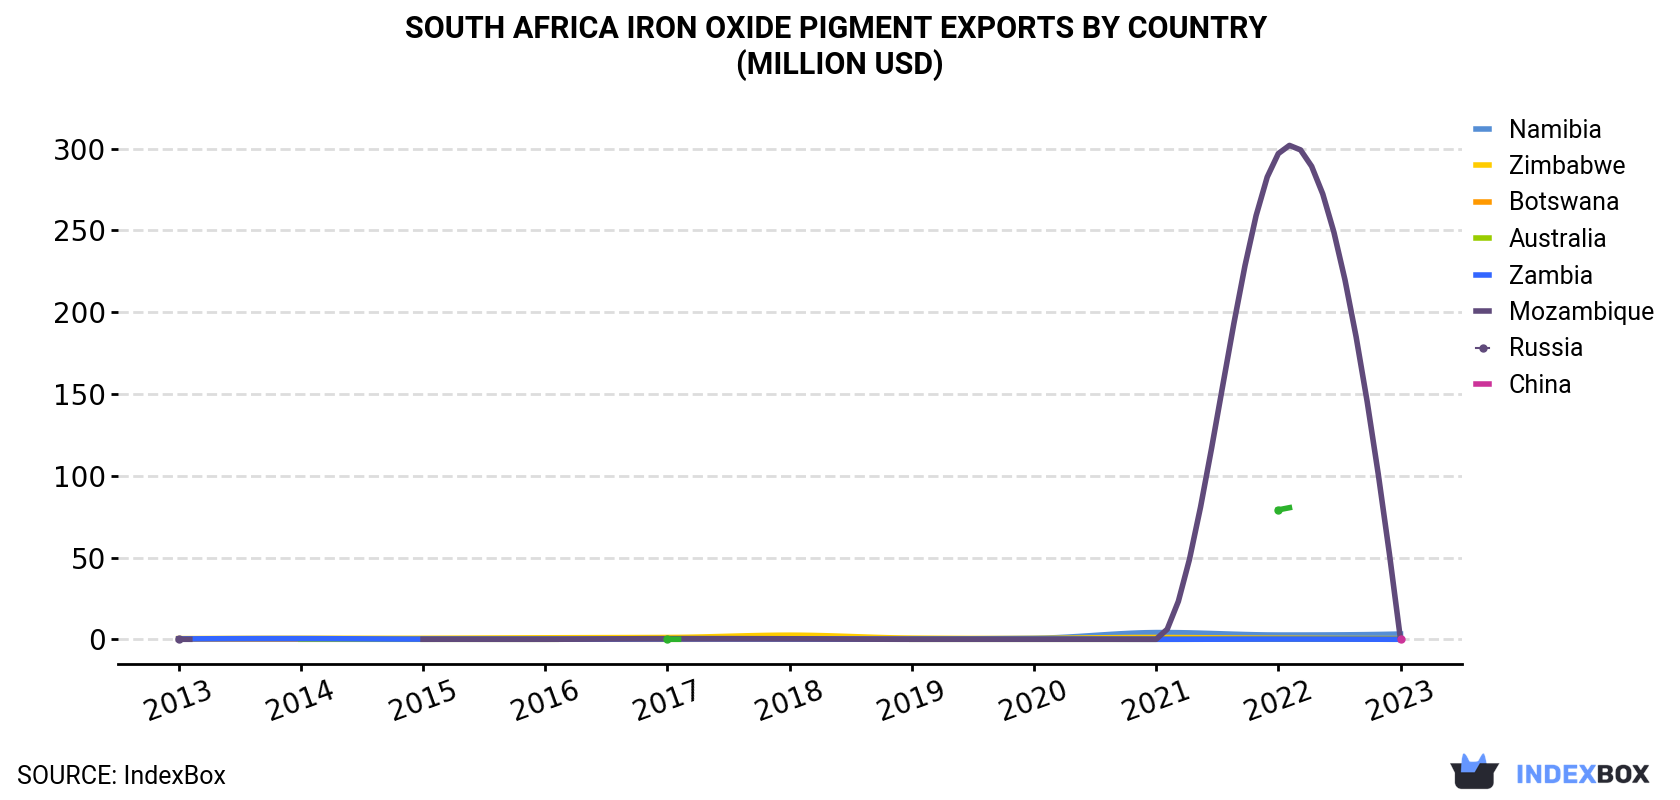 South Africa Iron Oxide Pigment Exports By Country (Million USD)